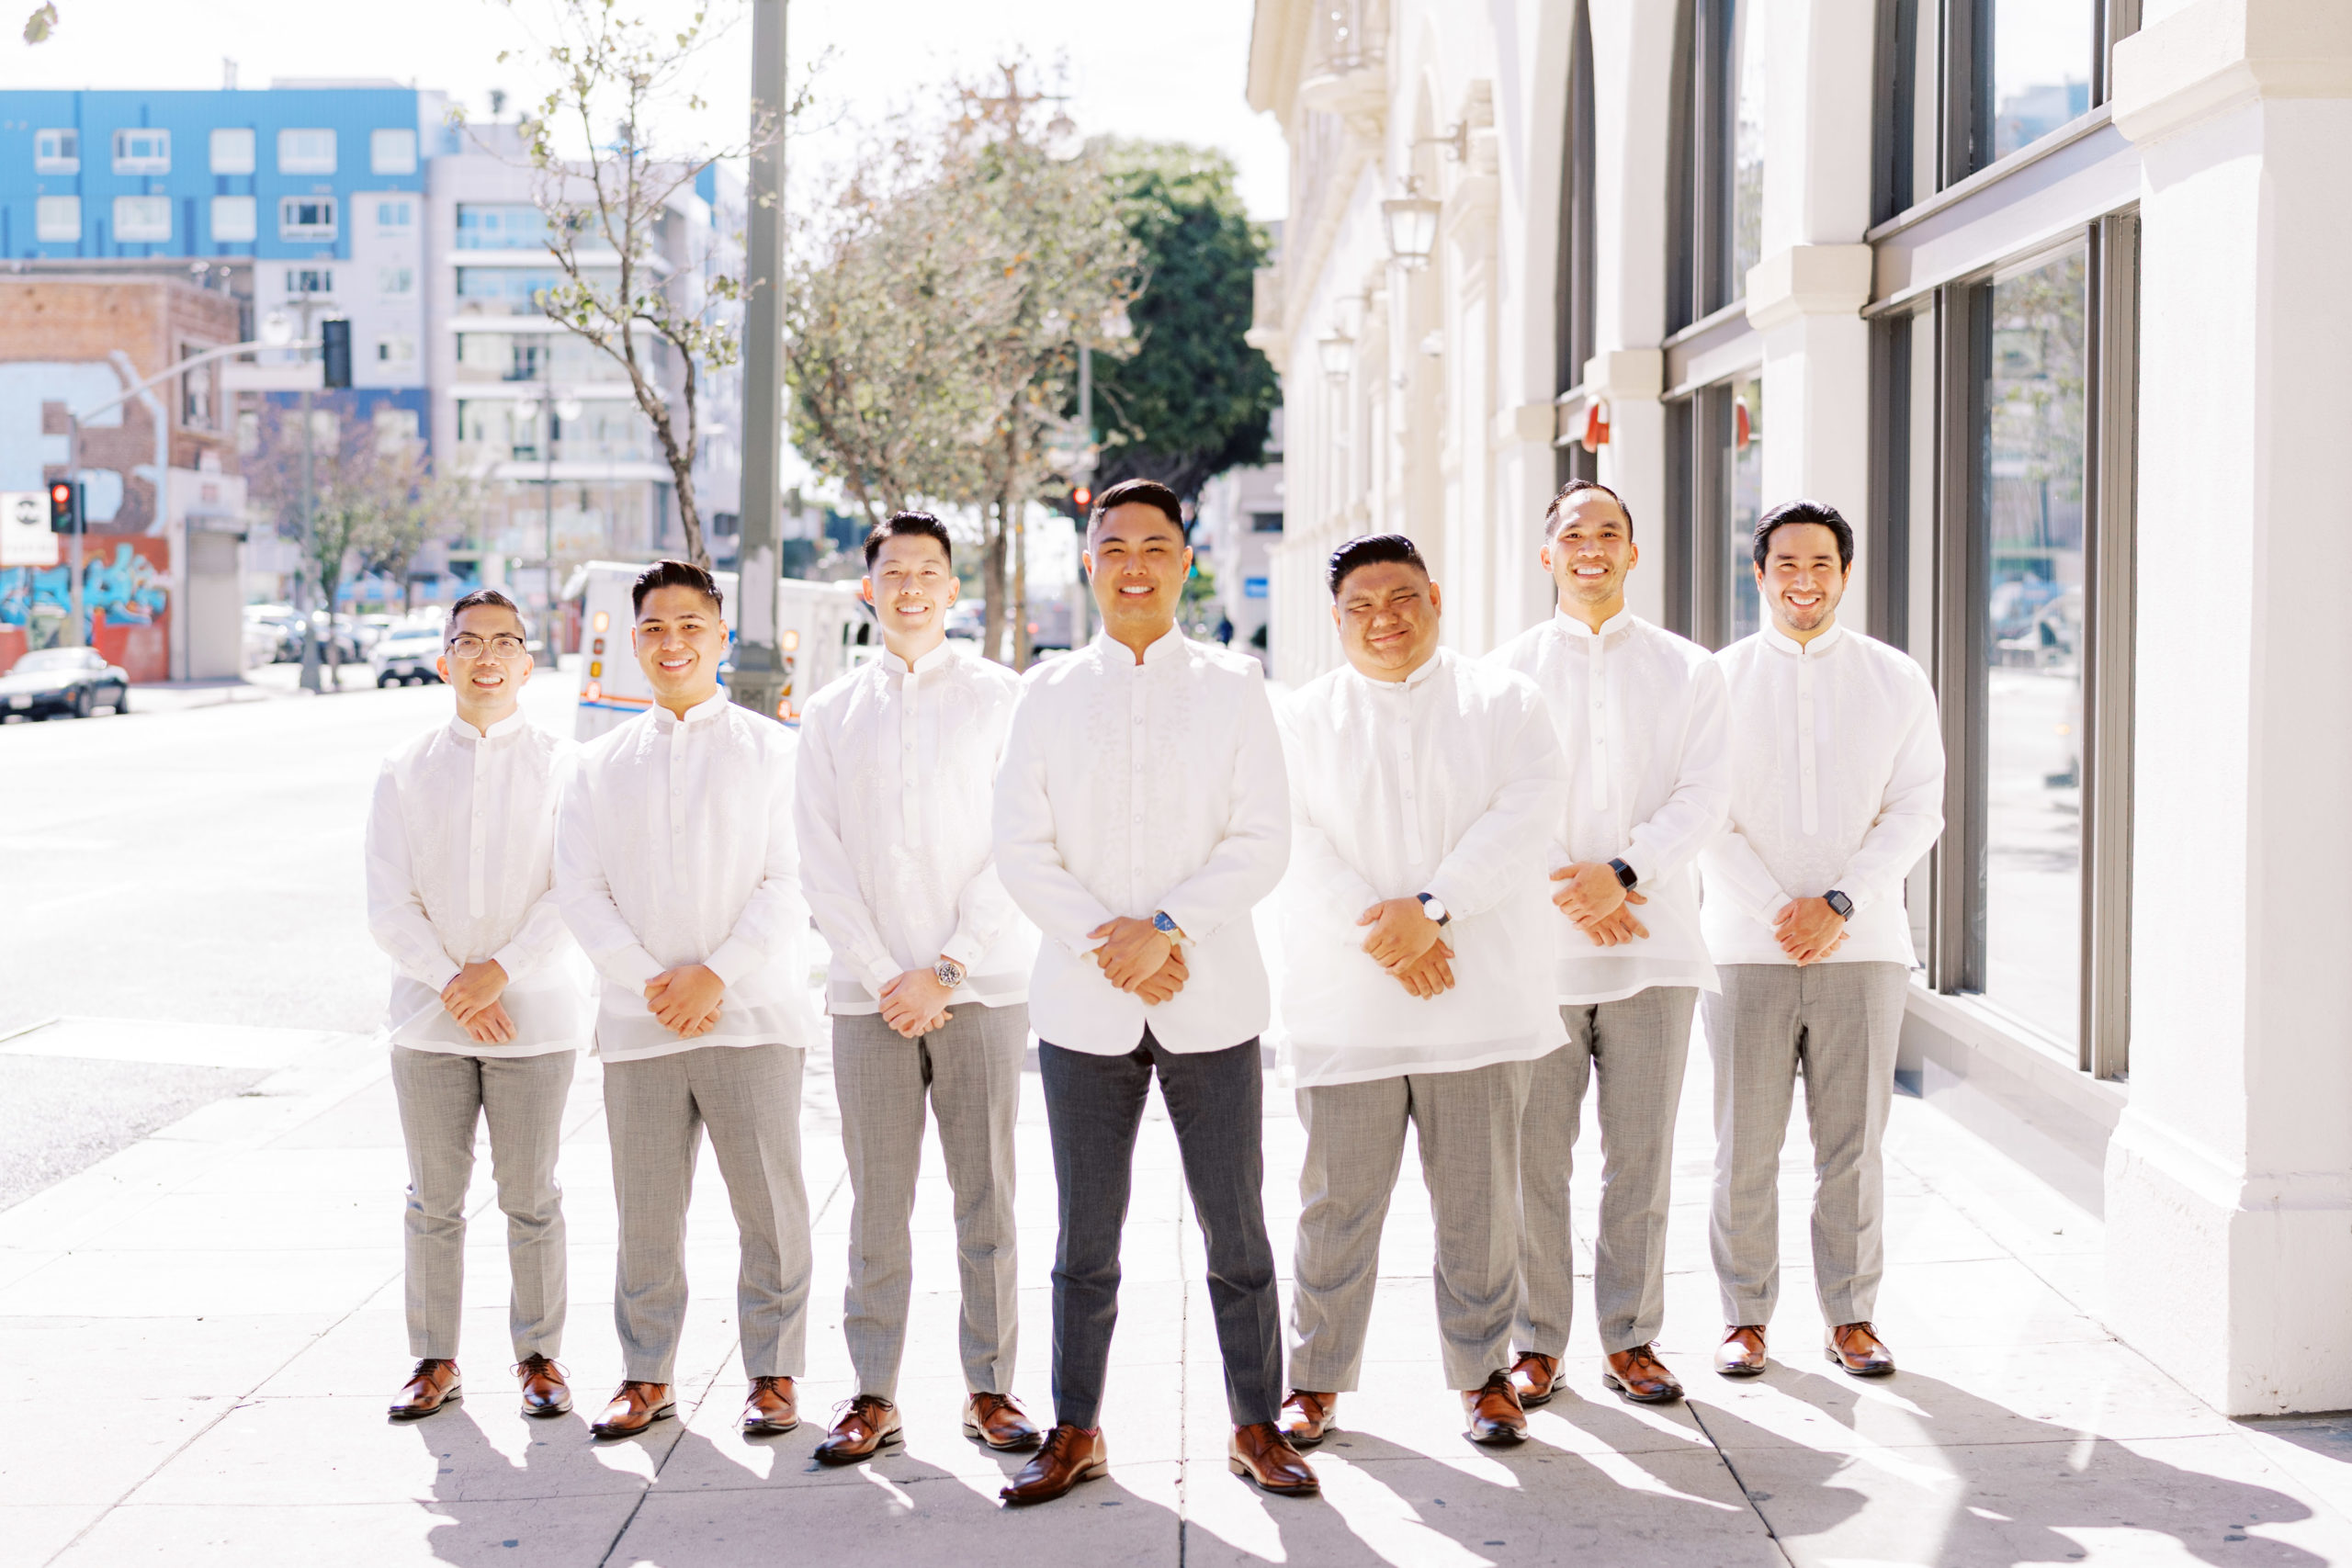 Groom with groomsmen in white traditional suits